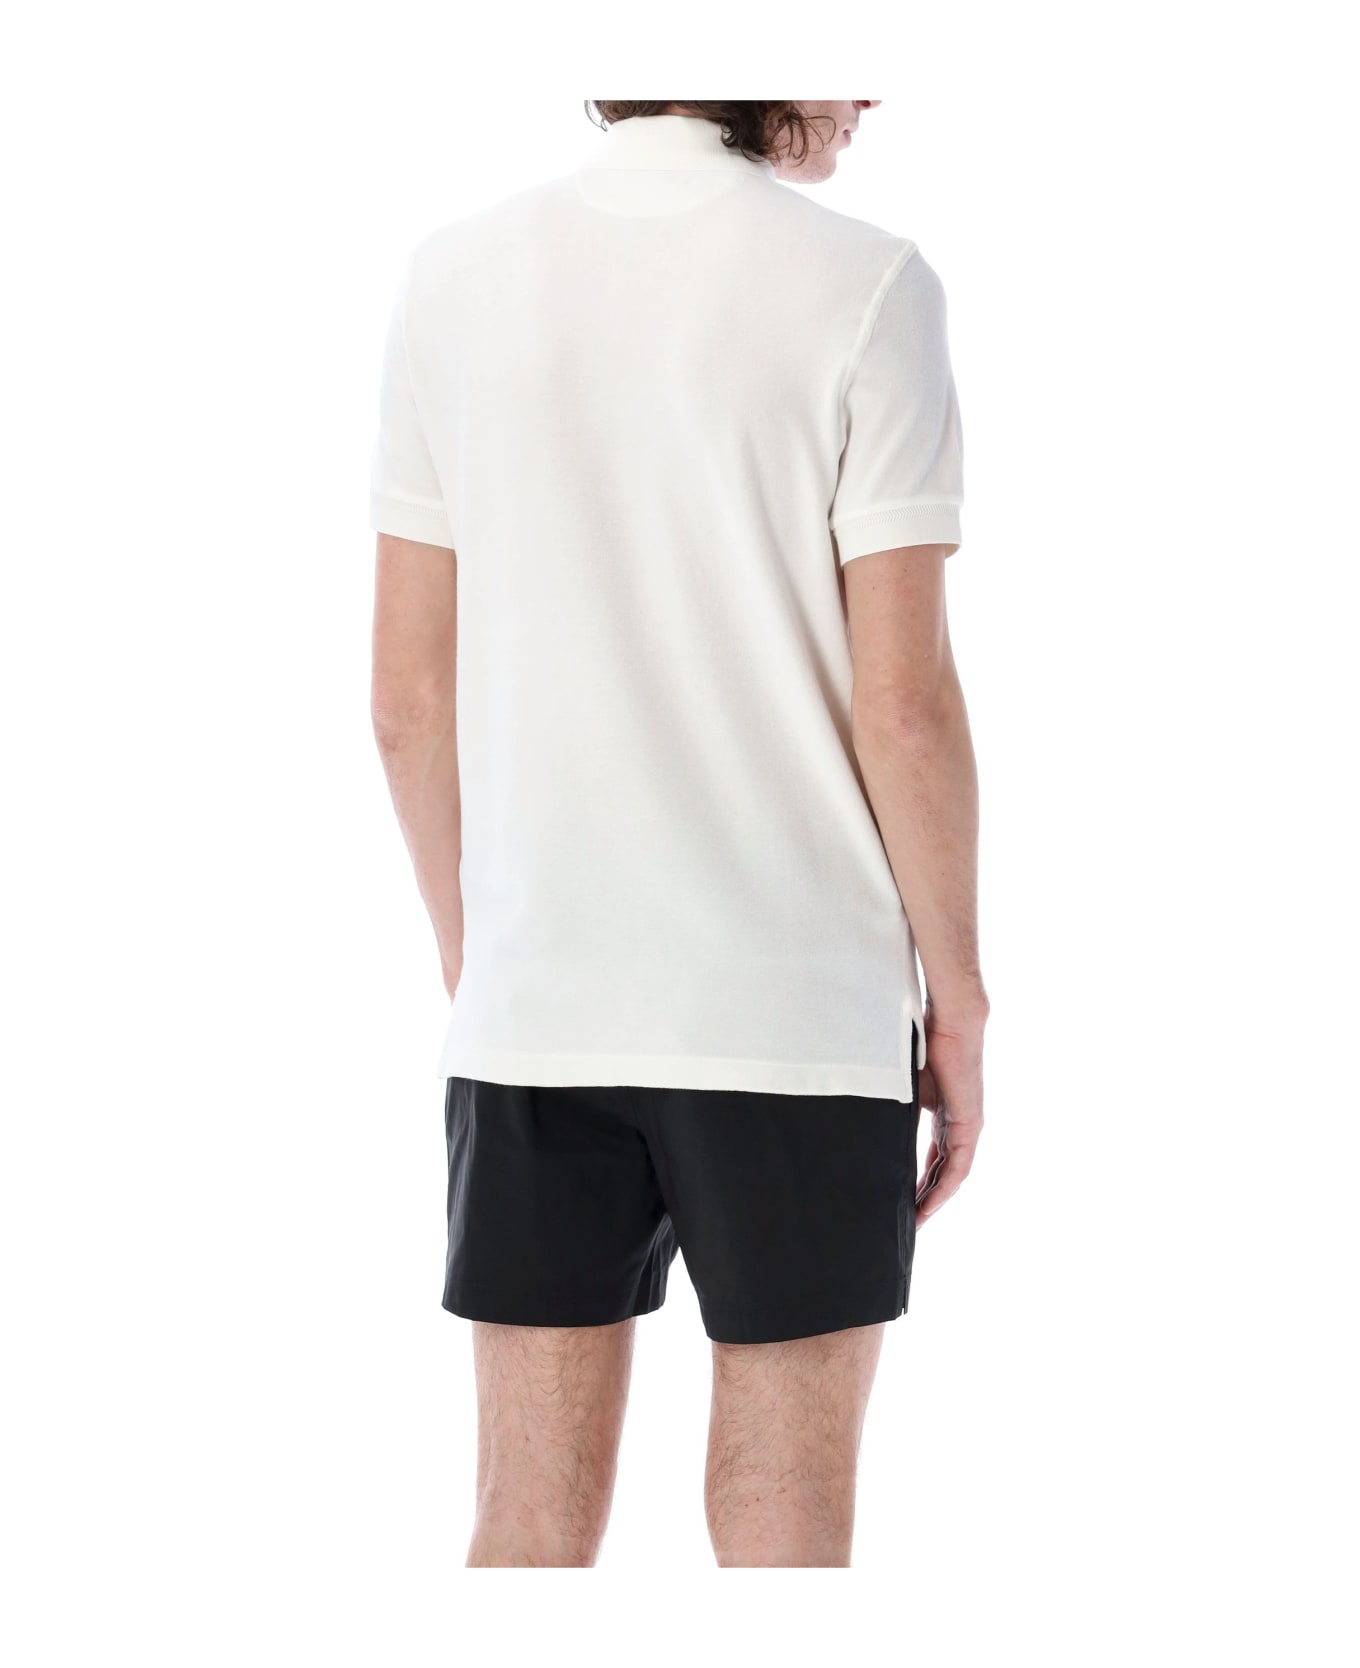 Tom Ford Towelling Polo - WHITE ポロシャツ